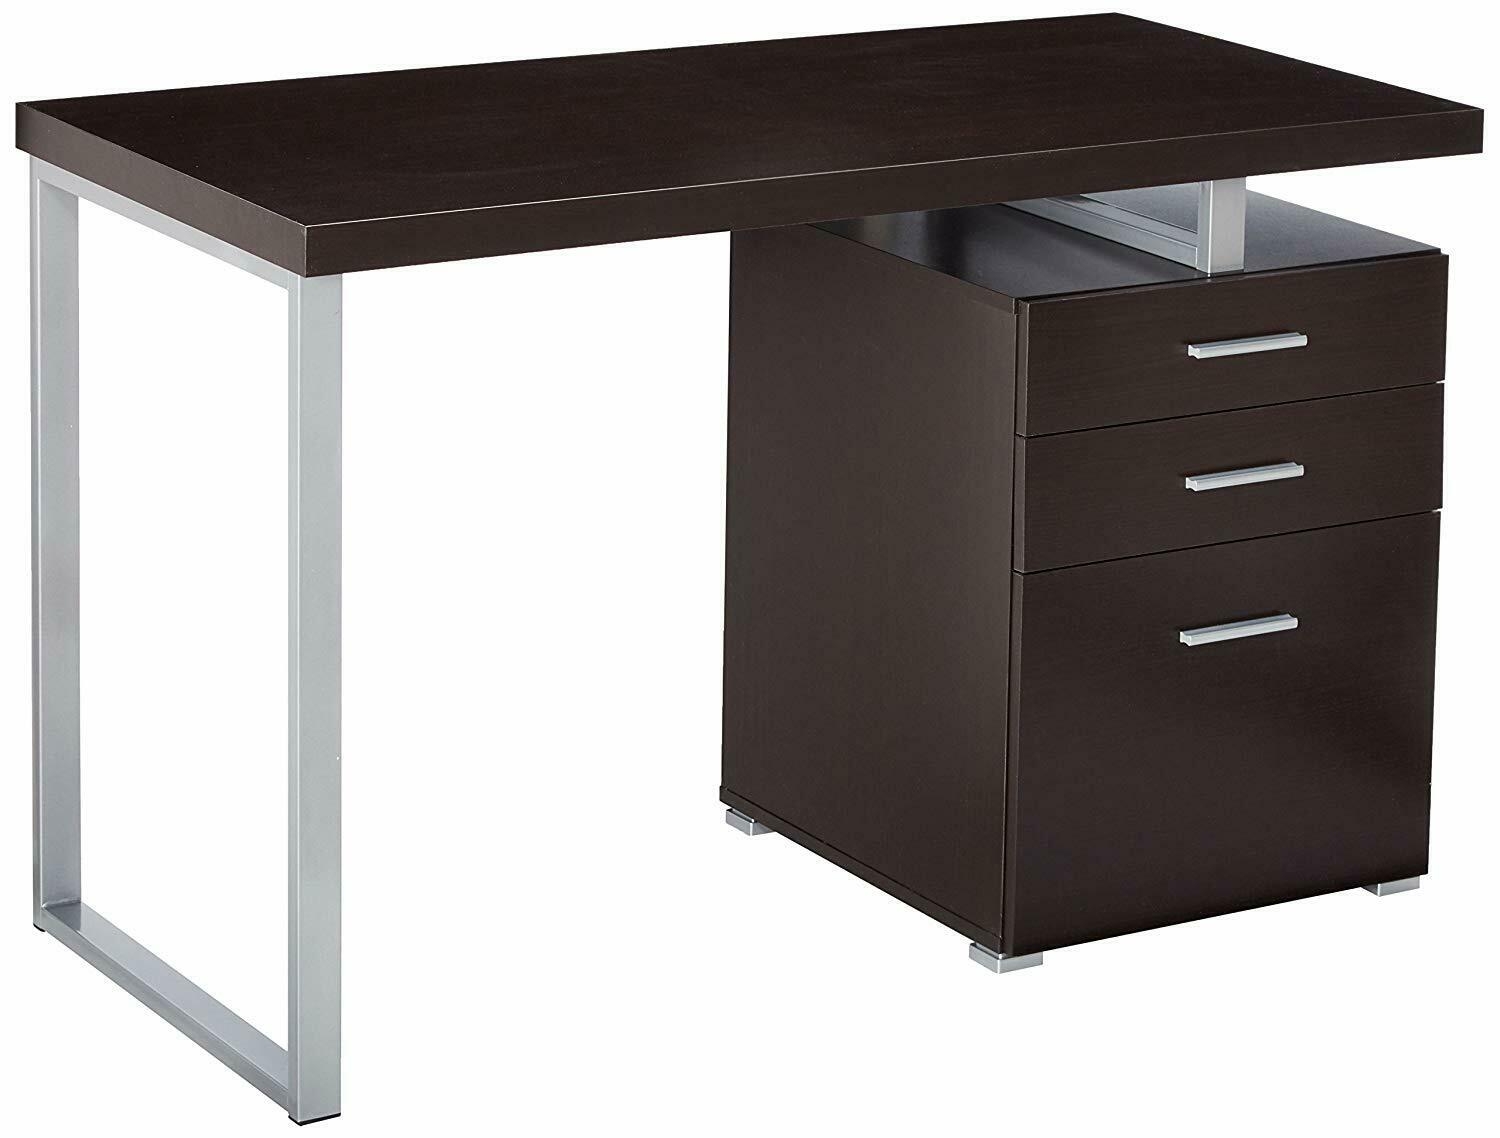 Small Desks With File Drawers Visualhunt, Small Corner Desk With Filing Drawer